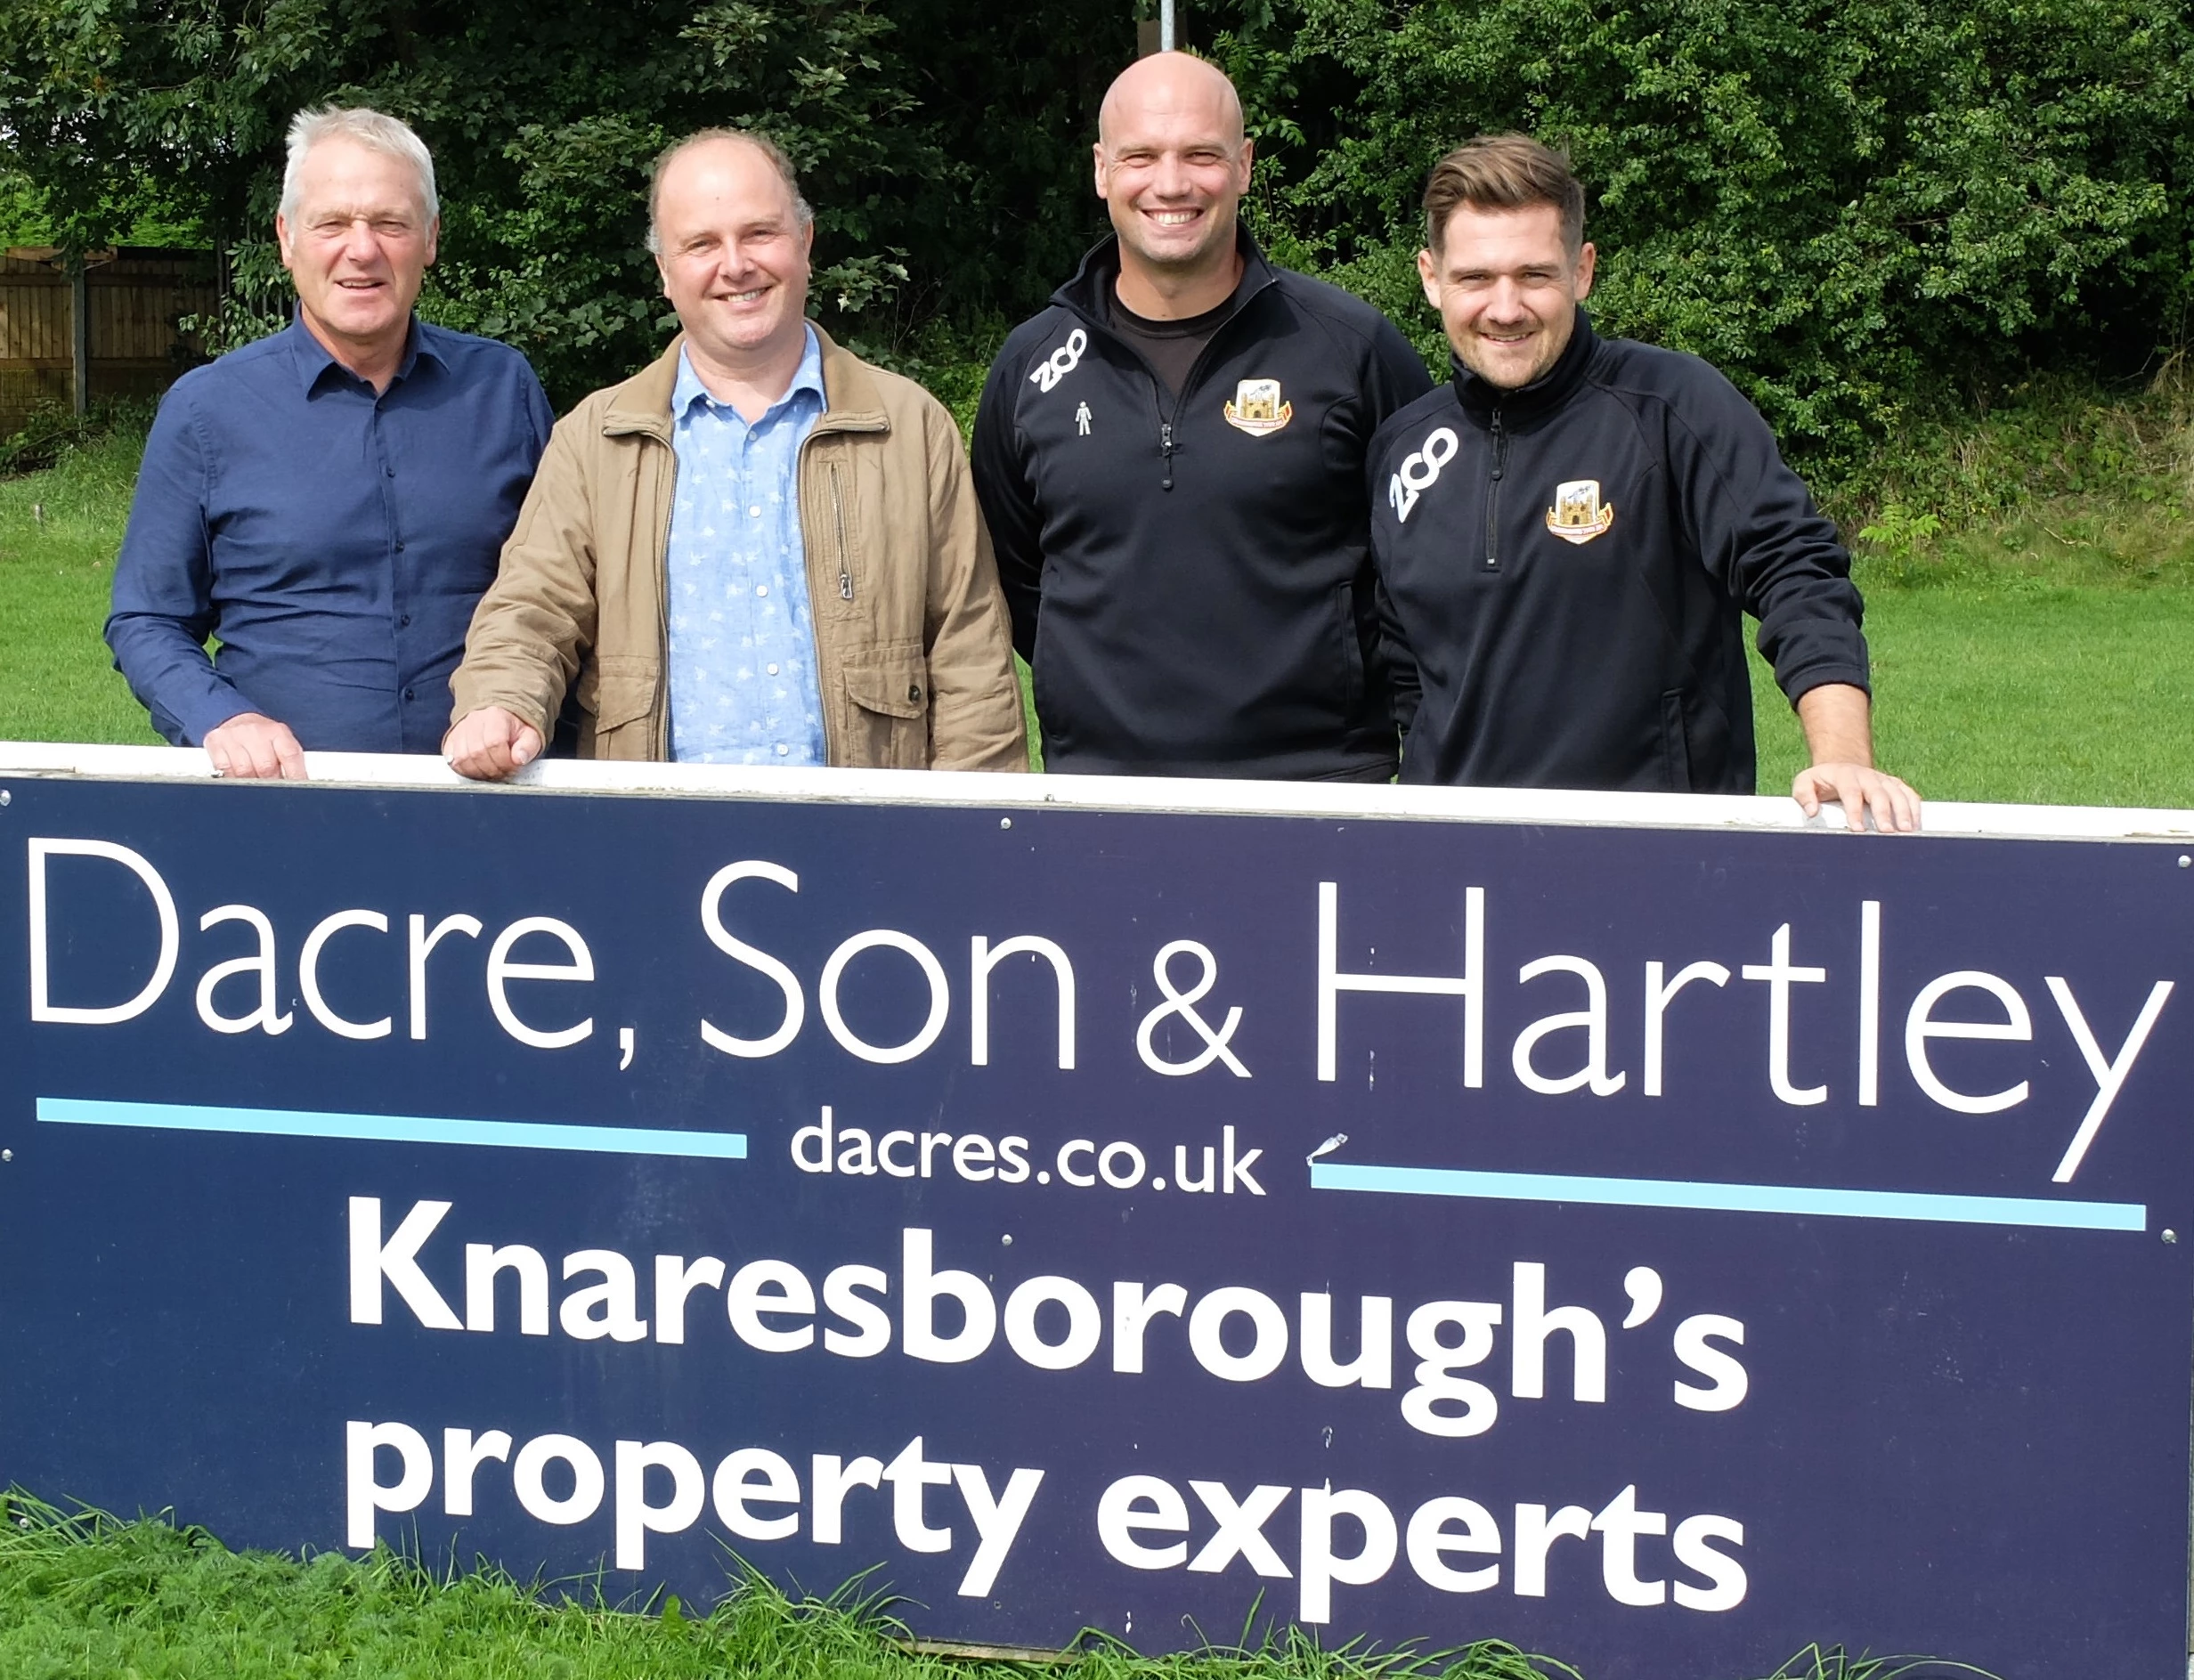 Commercial Manager Chris Dight, Nick Alcock from Dacres, manager Paul Stansfield and 1st team player Ben Parkes.